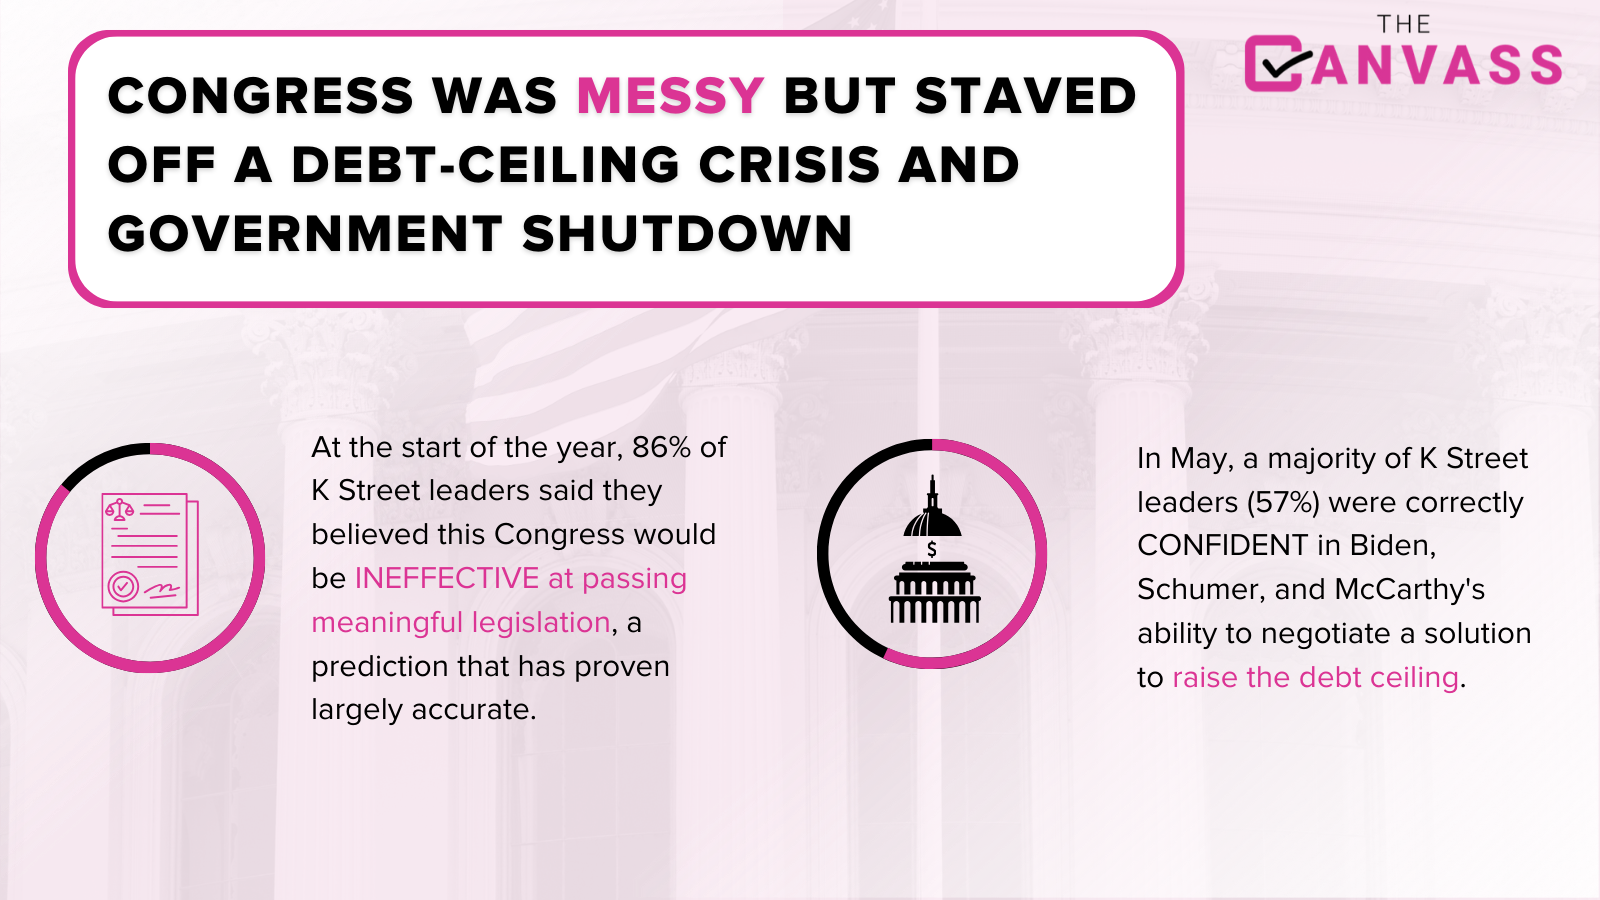 A chaotic Congress somehow avoided a debt-limit crisis and government shutdown